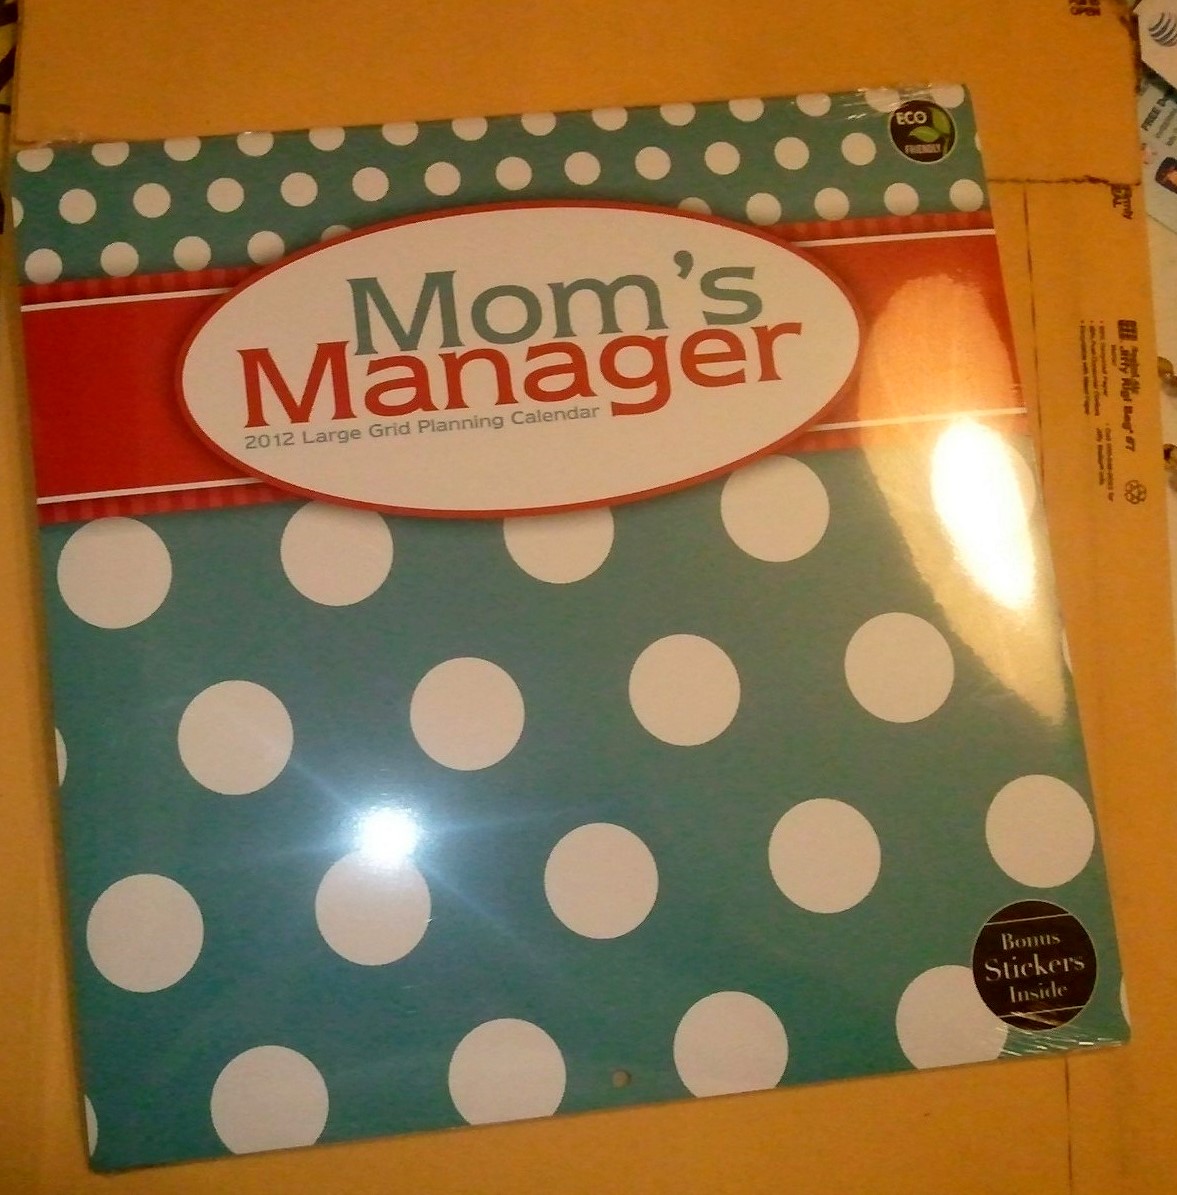 hands-and-hearts-more-than-full-tf-publishing-mom-s-manager-calendar